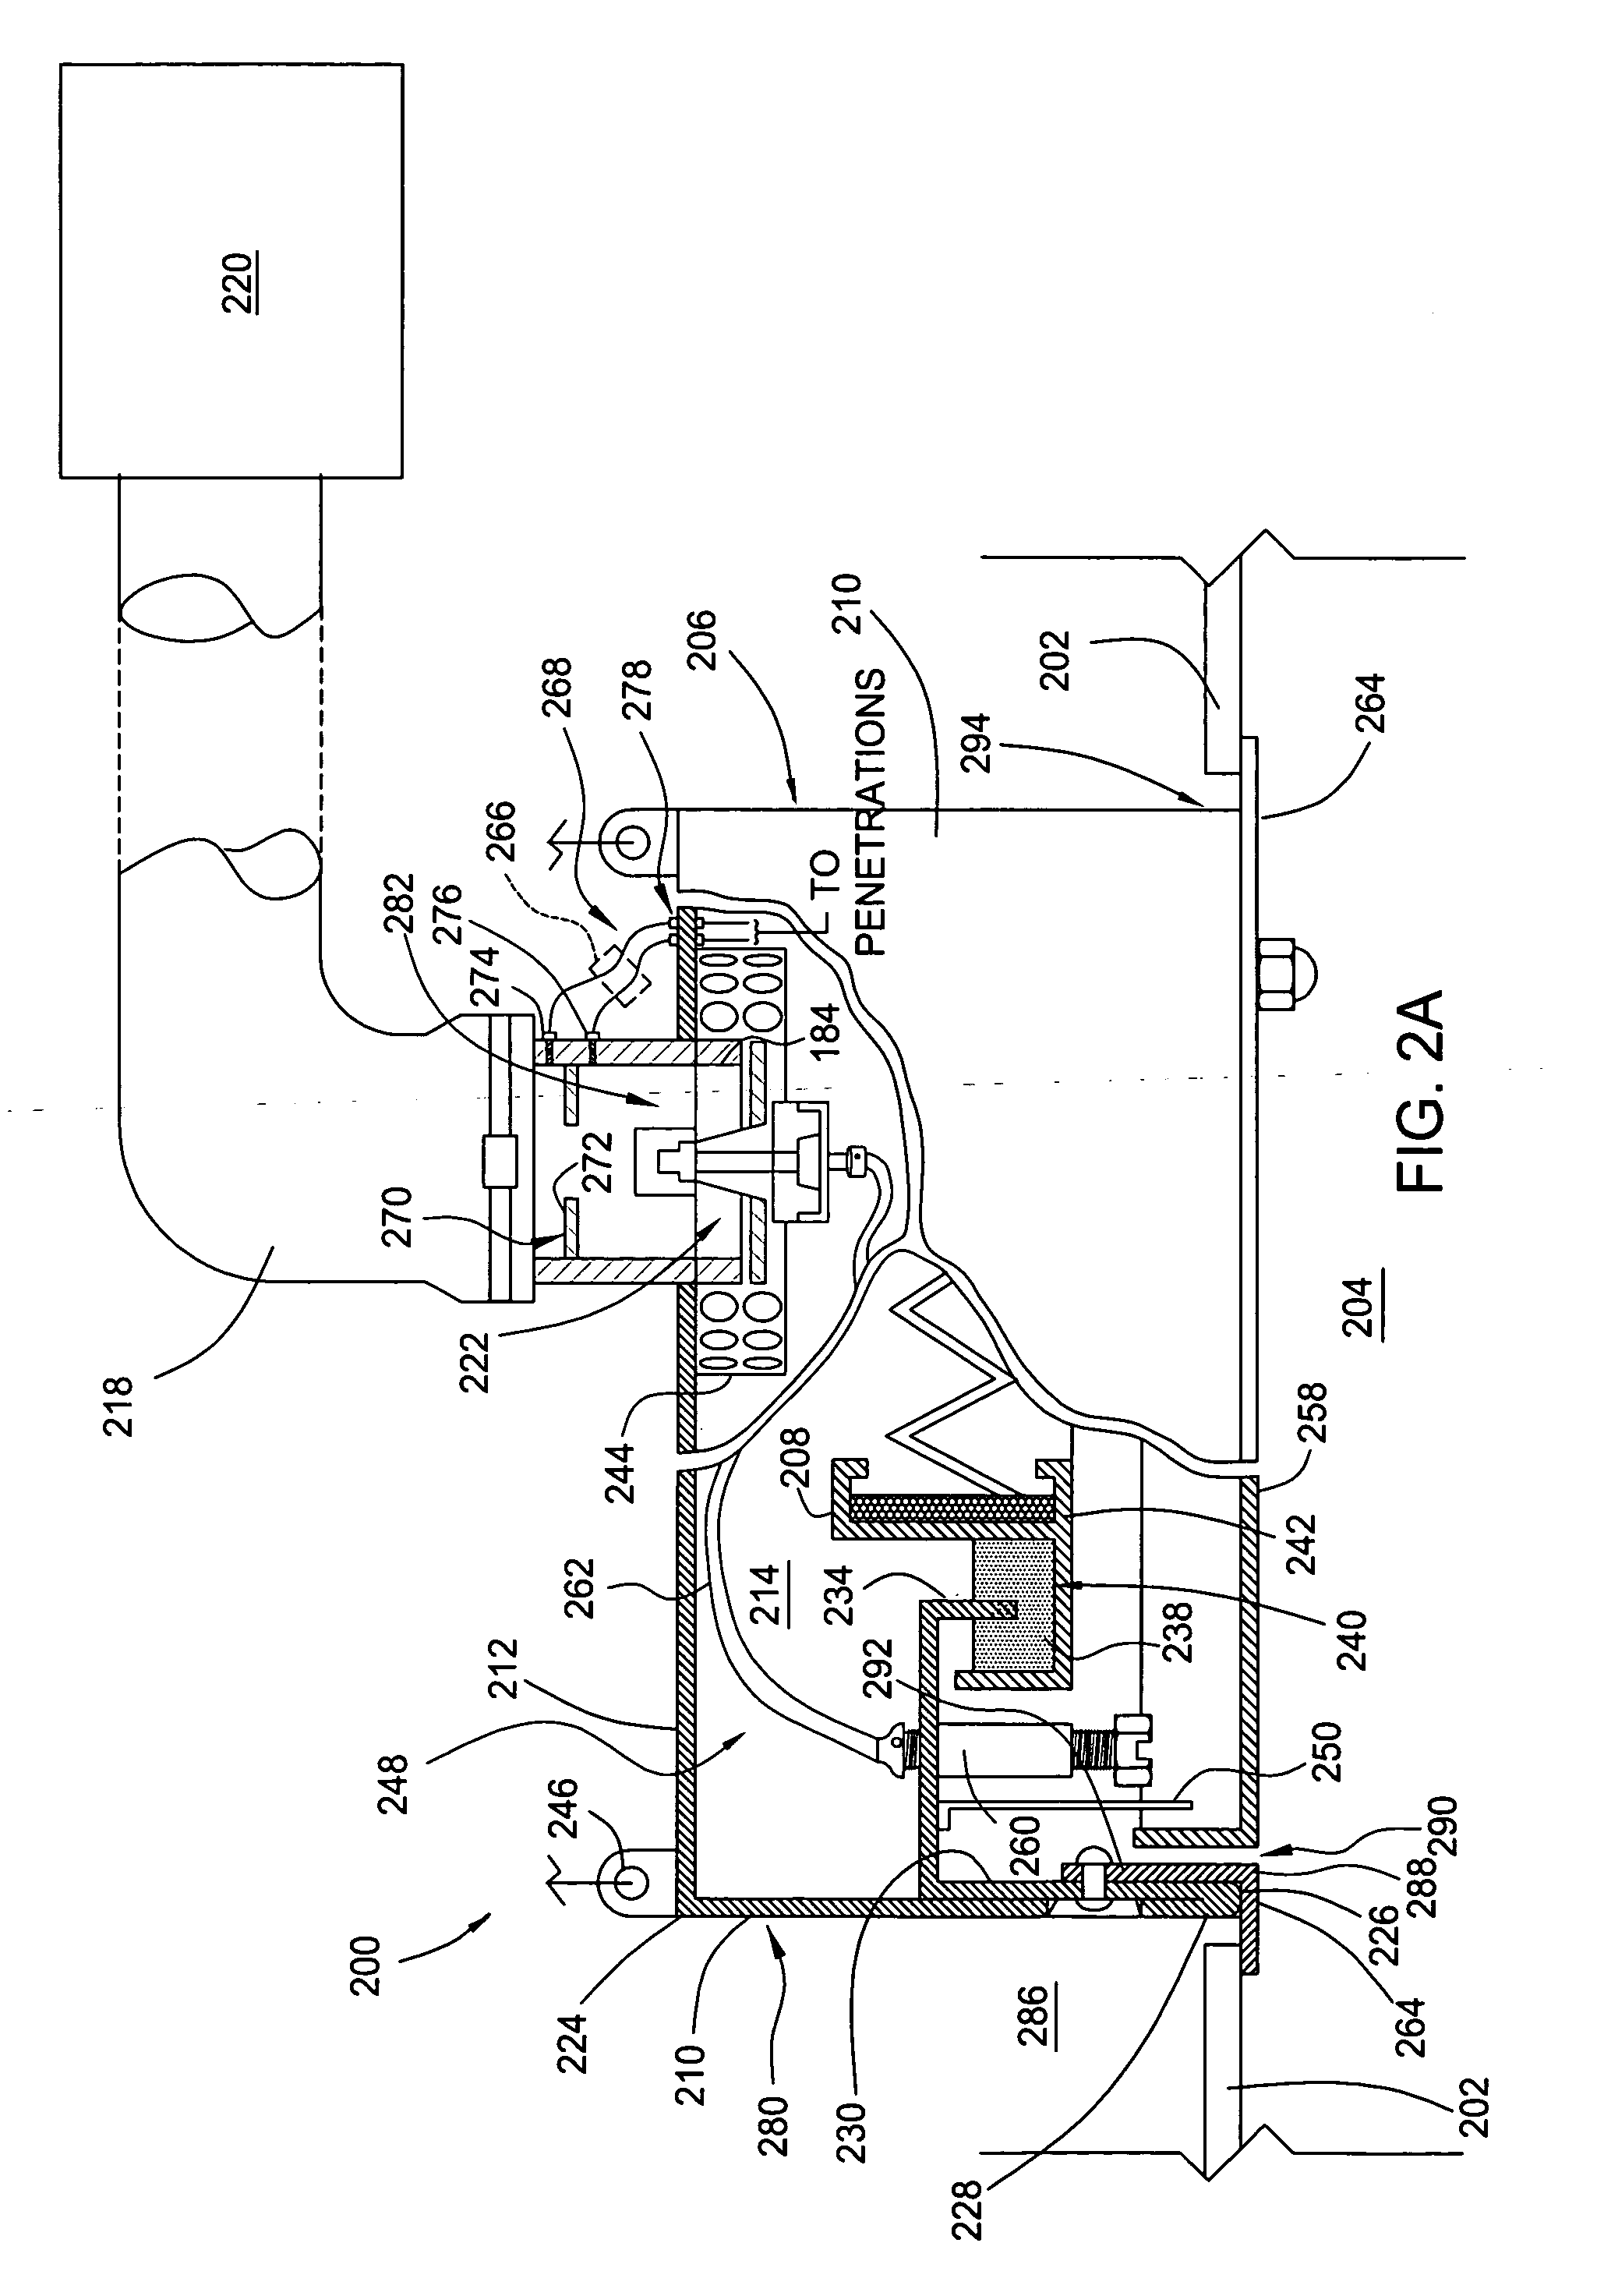 Filter module with flow control